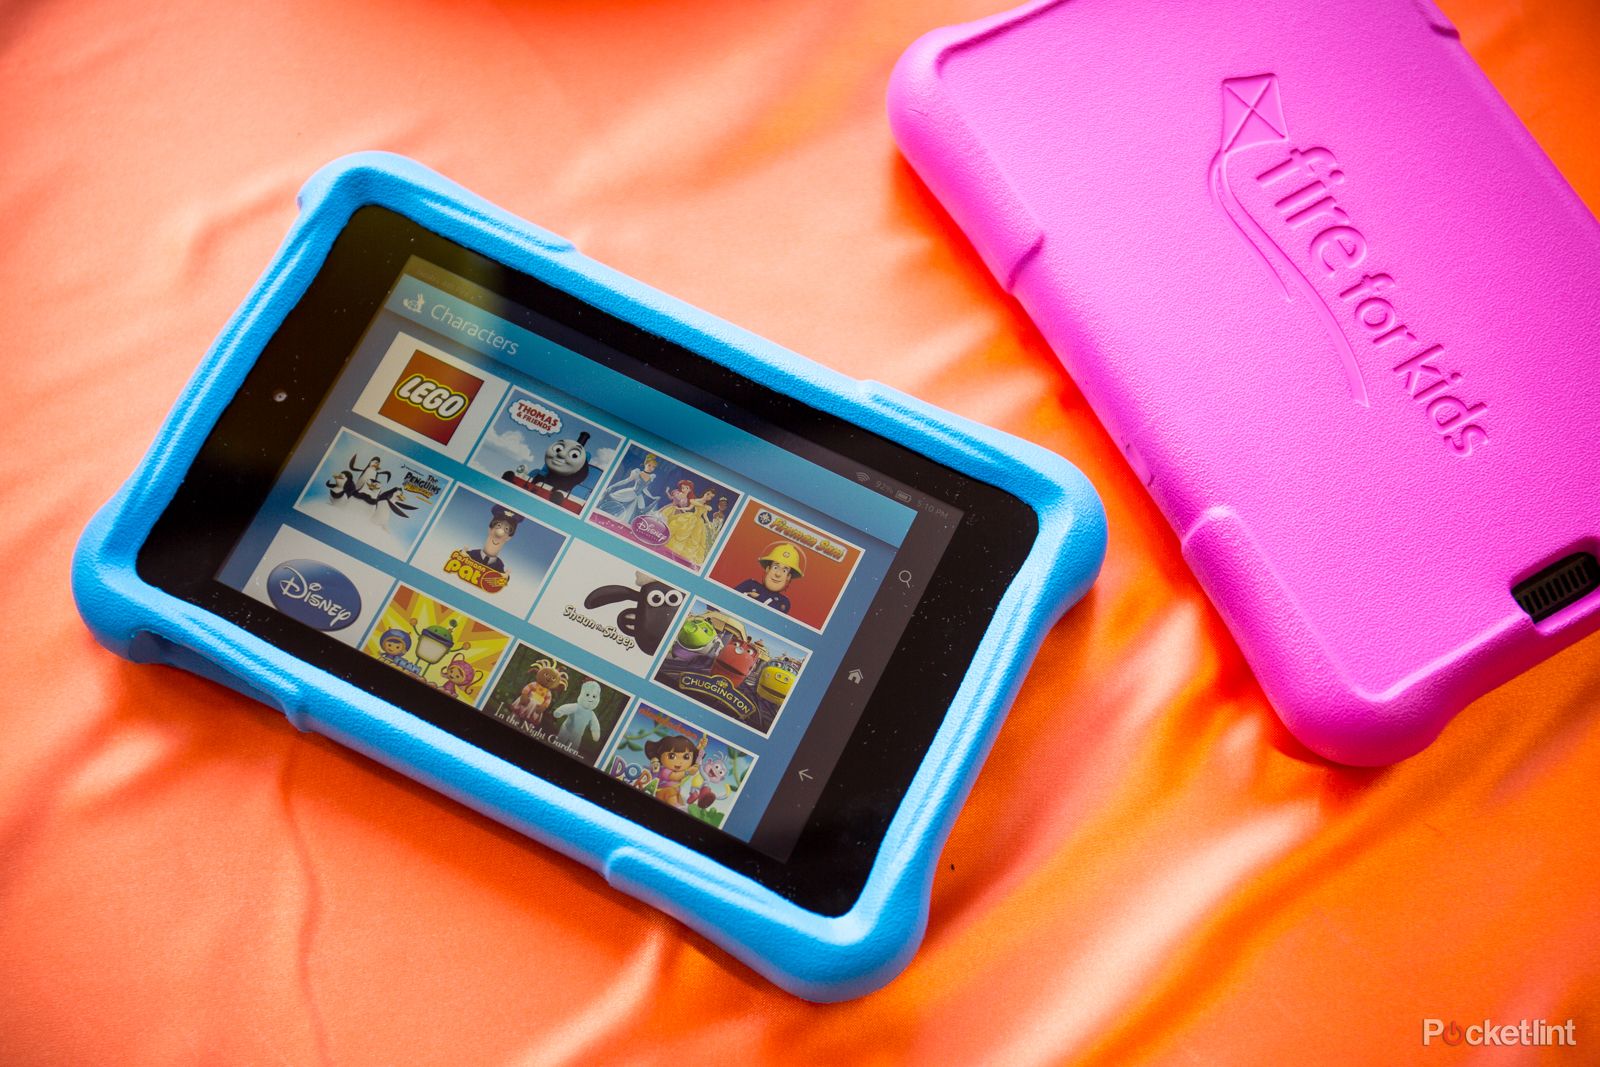 amazon fire hd kids edition tablet available for pre order we check out its child friendly frills image 2